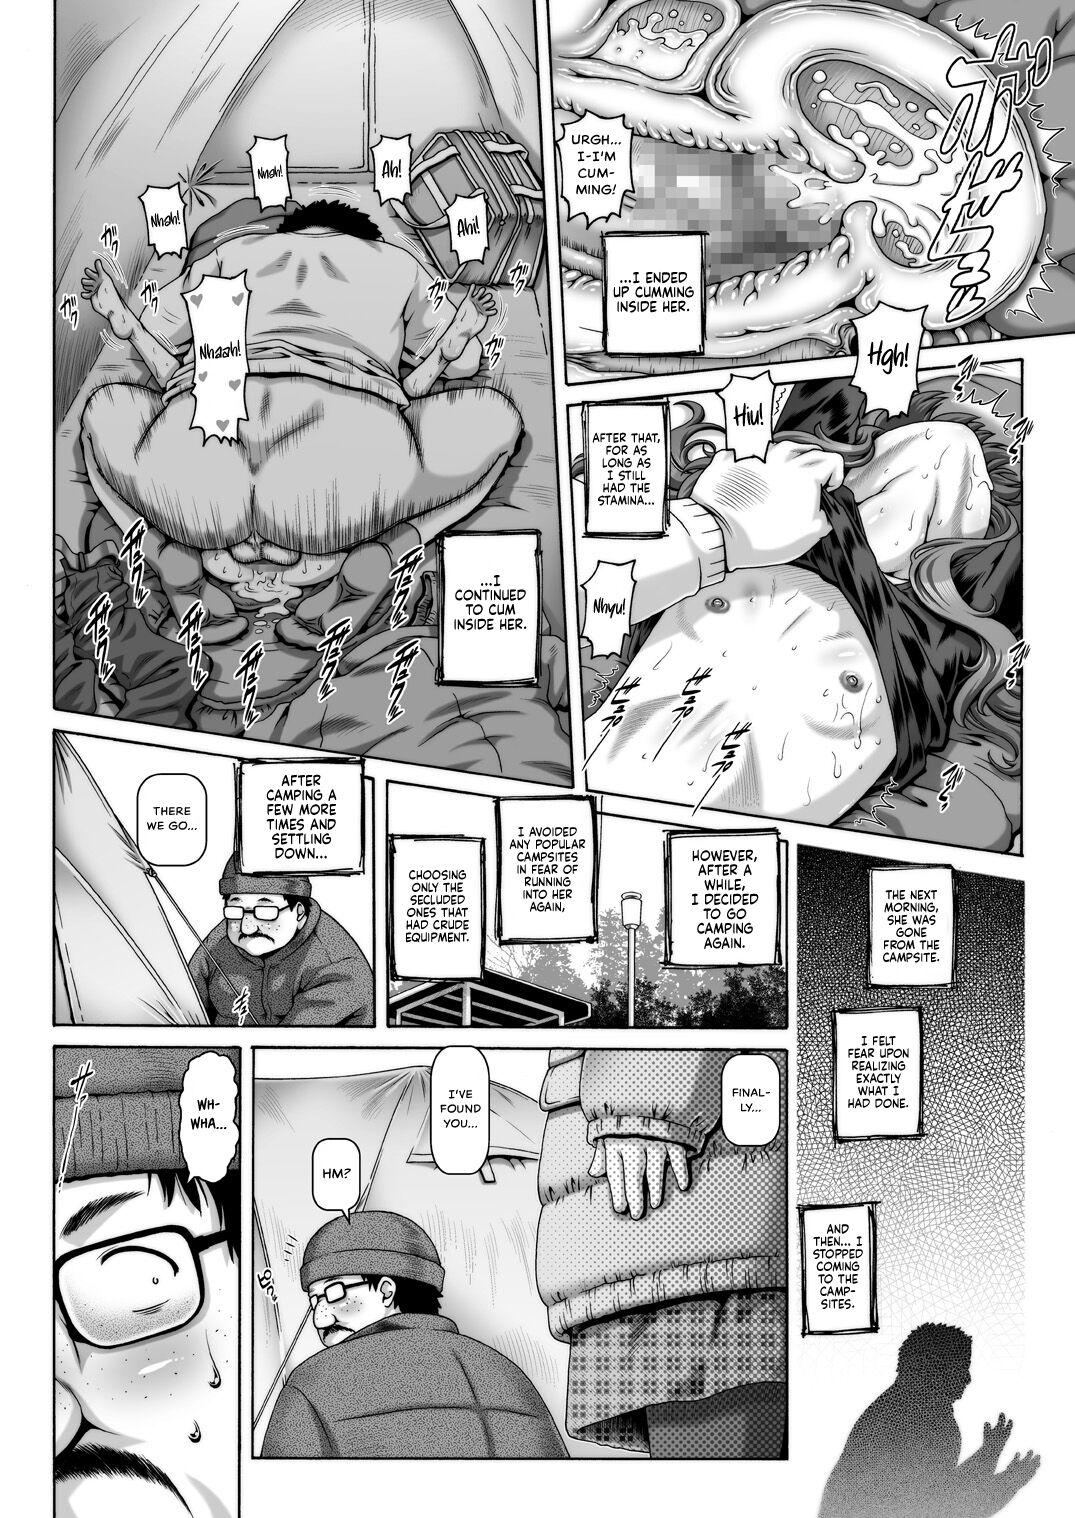 Real Amateurs EMPIRE HARD CORE 2021 SPRING - Yuru camp | laid back camp Sixtynine - Page 10